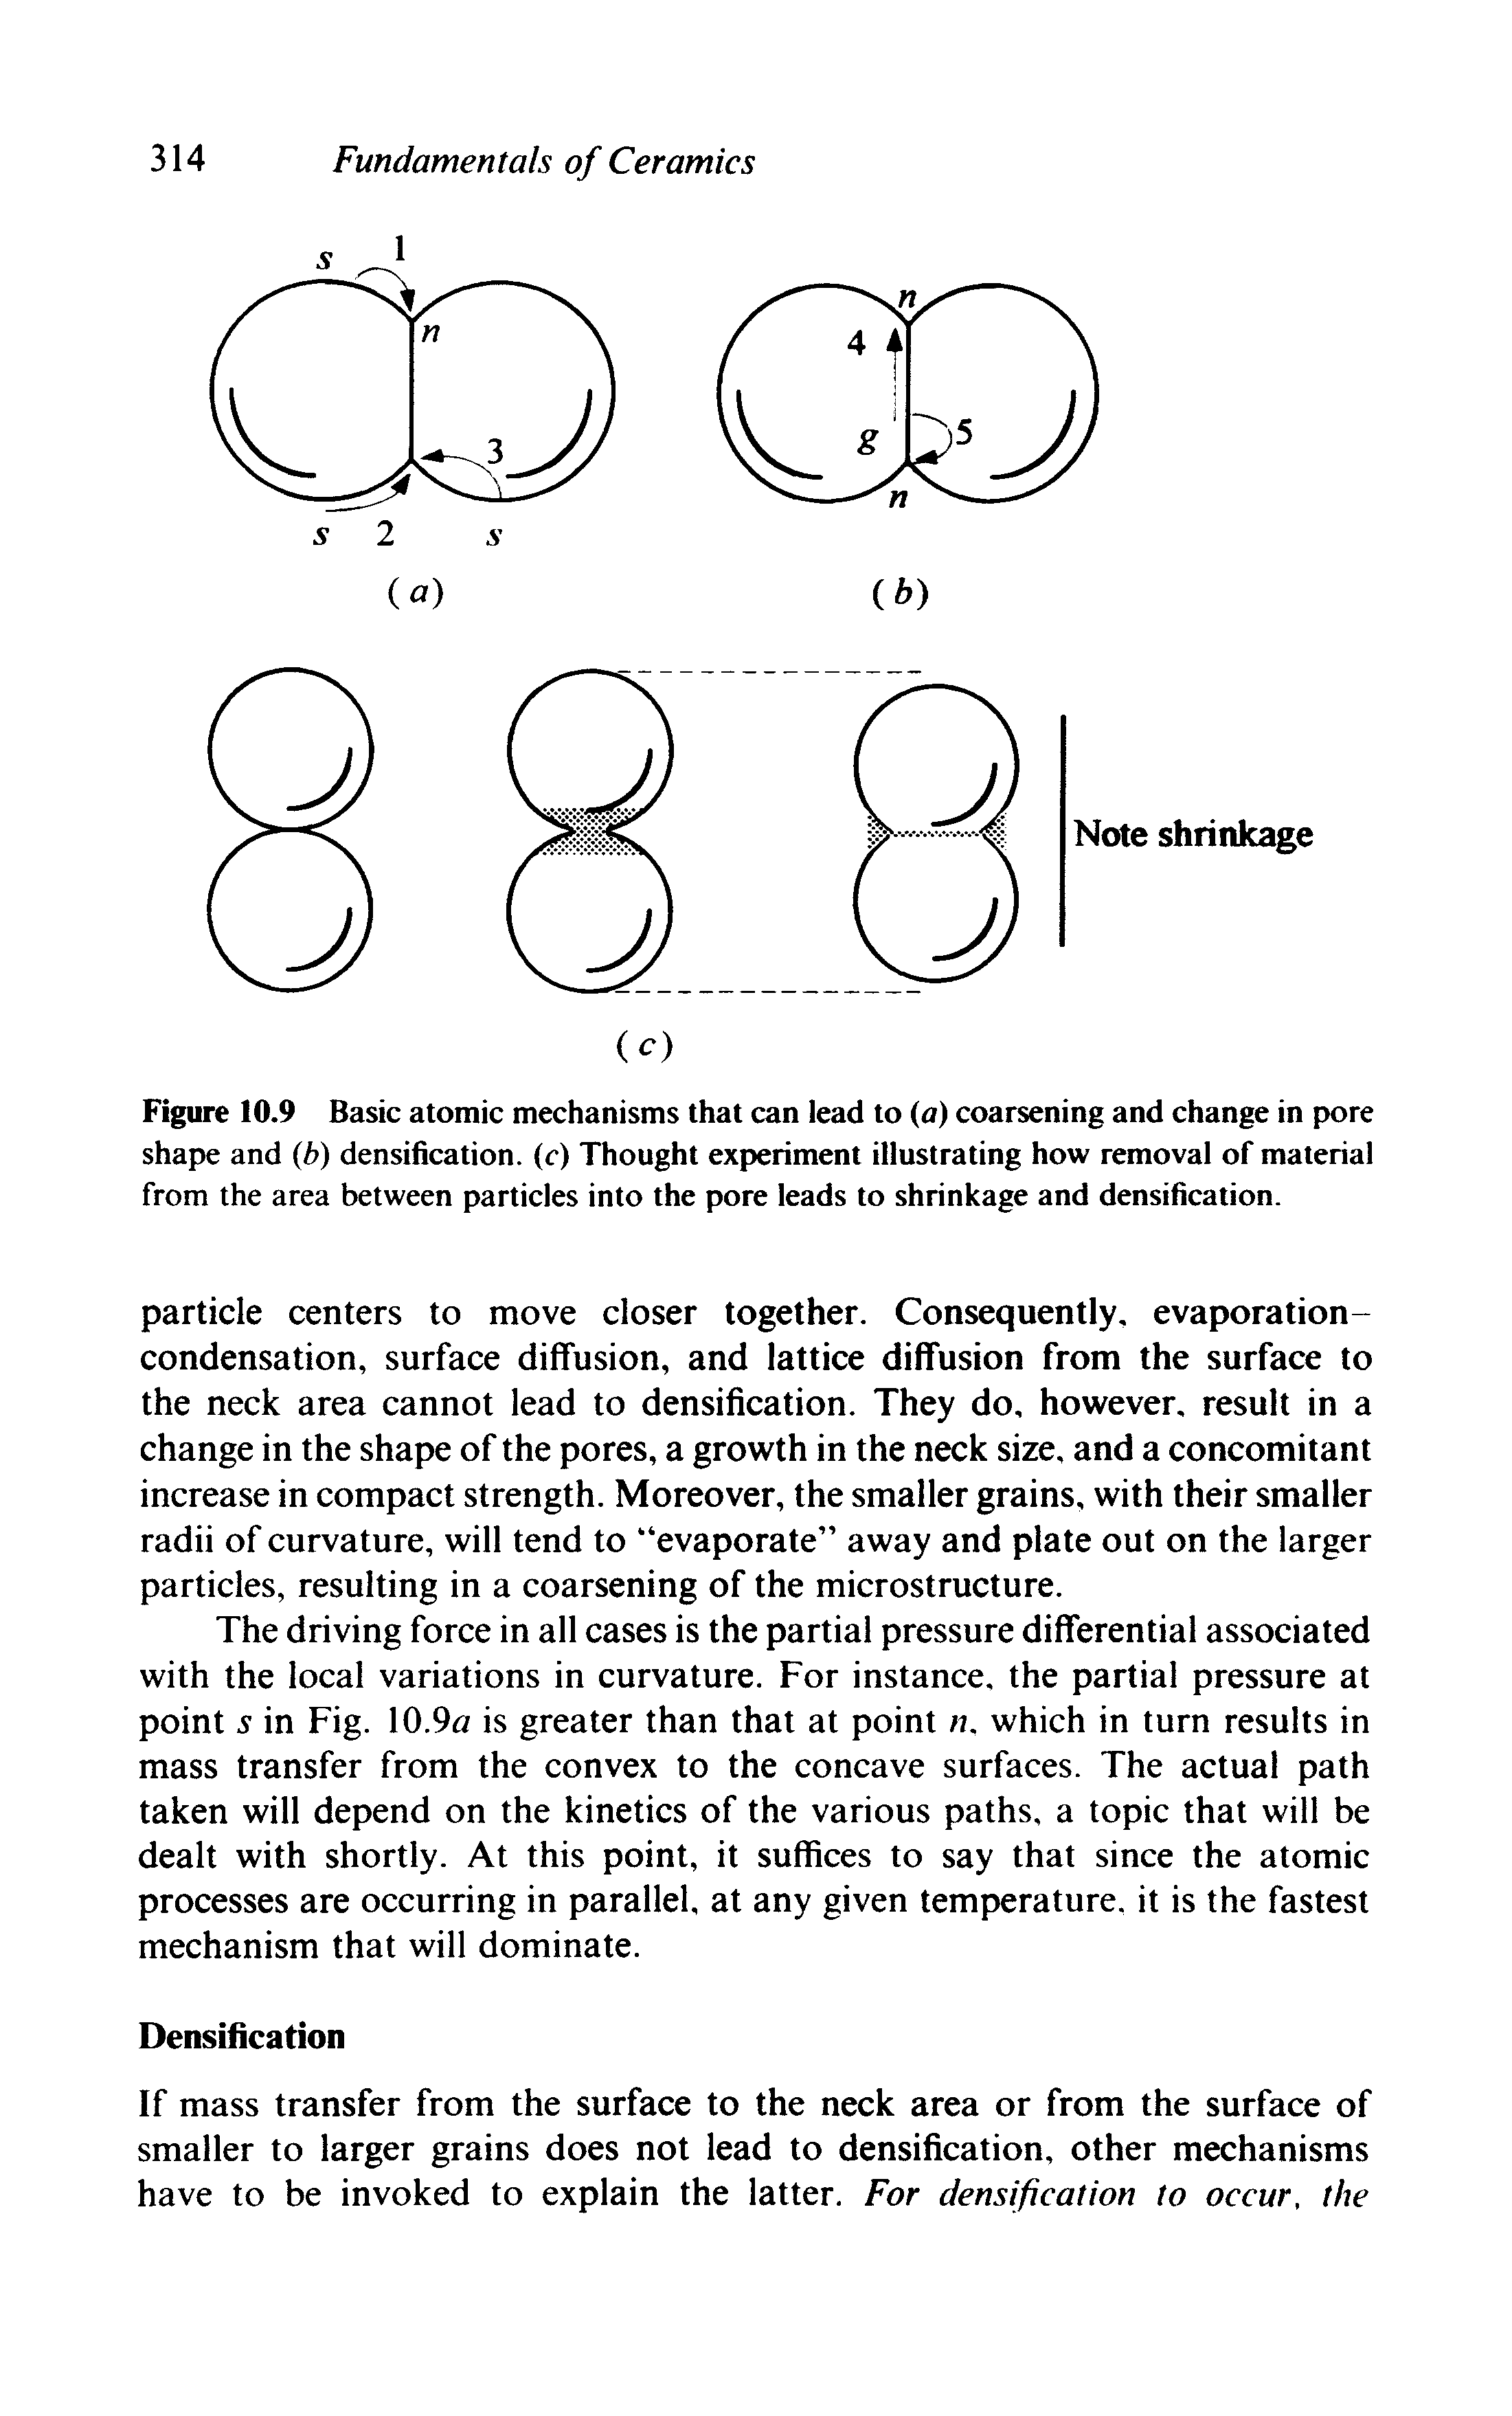 Figure 10.9 Basic atomic mechanisms that can lead to (a) coarsening and change in pore shape and (b) densification. (c) Thought experiment illustrating how removal of material from the area between particles into the pore leads to shrinkage and densification.